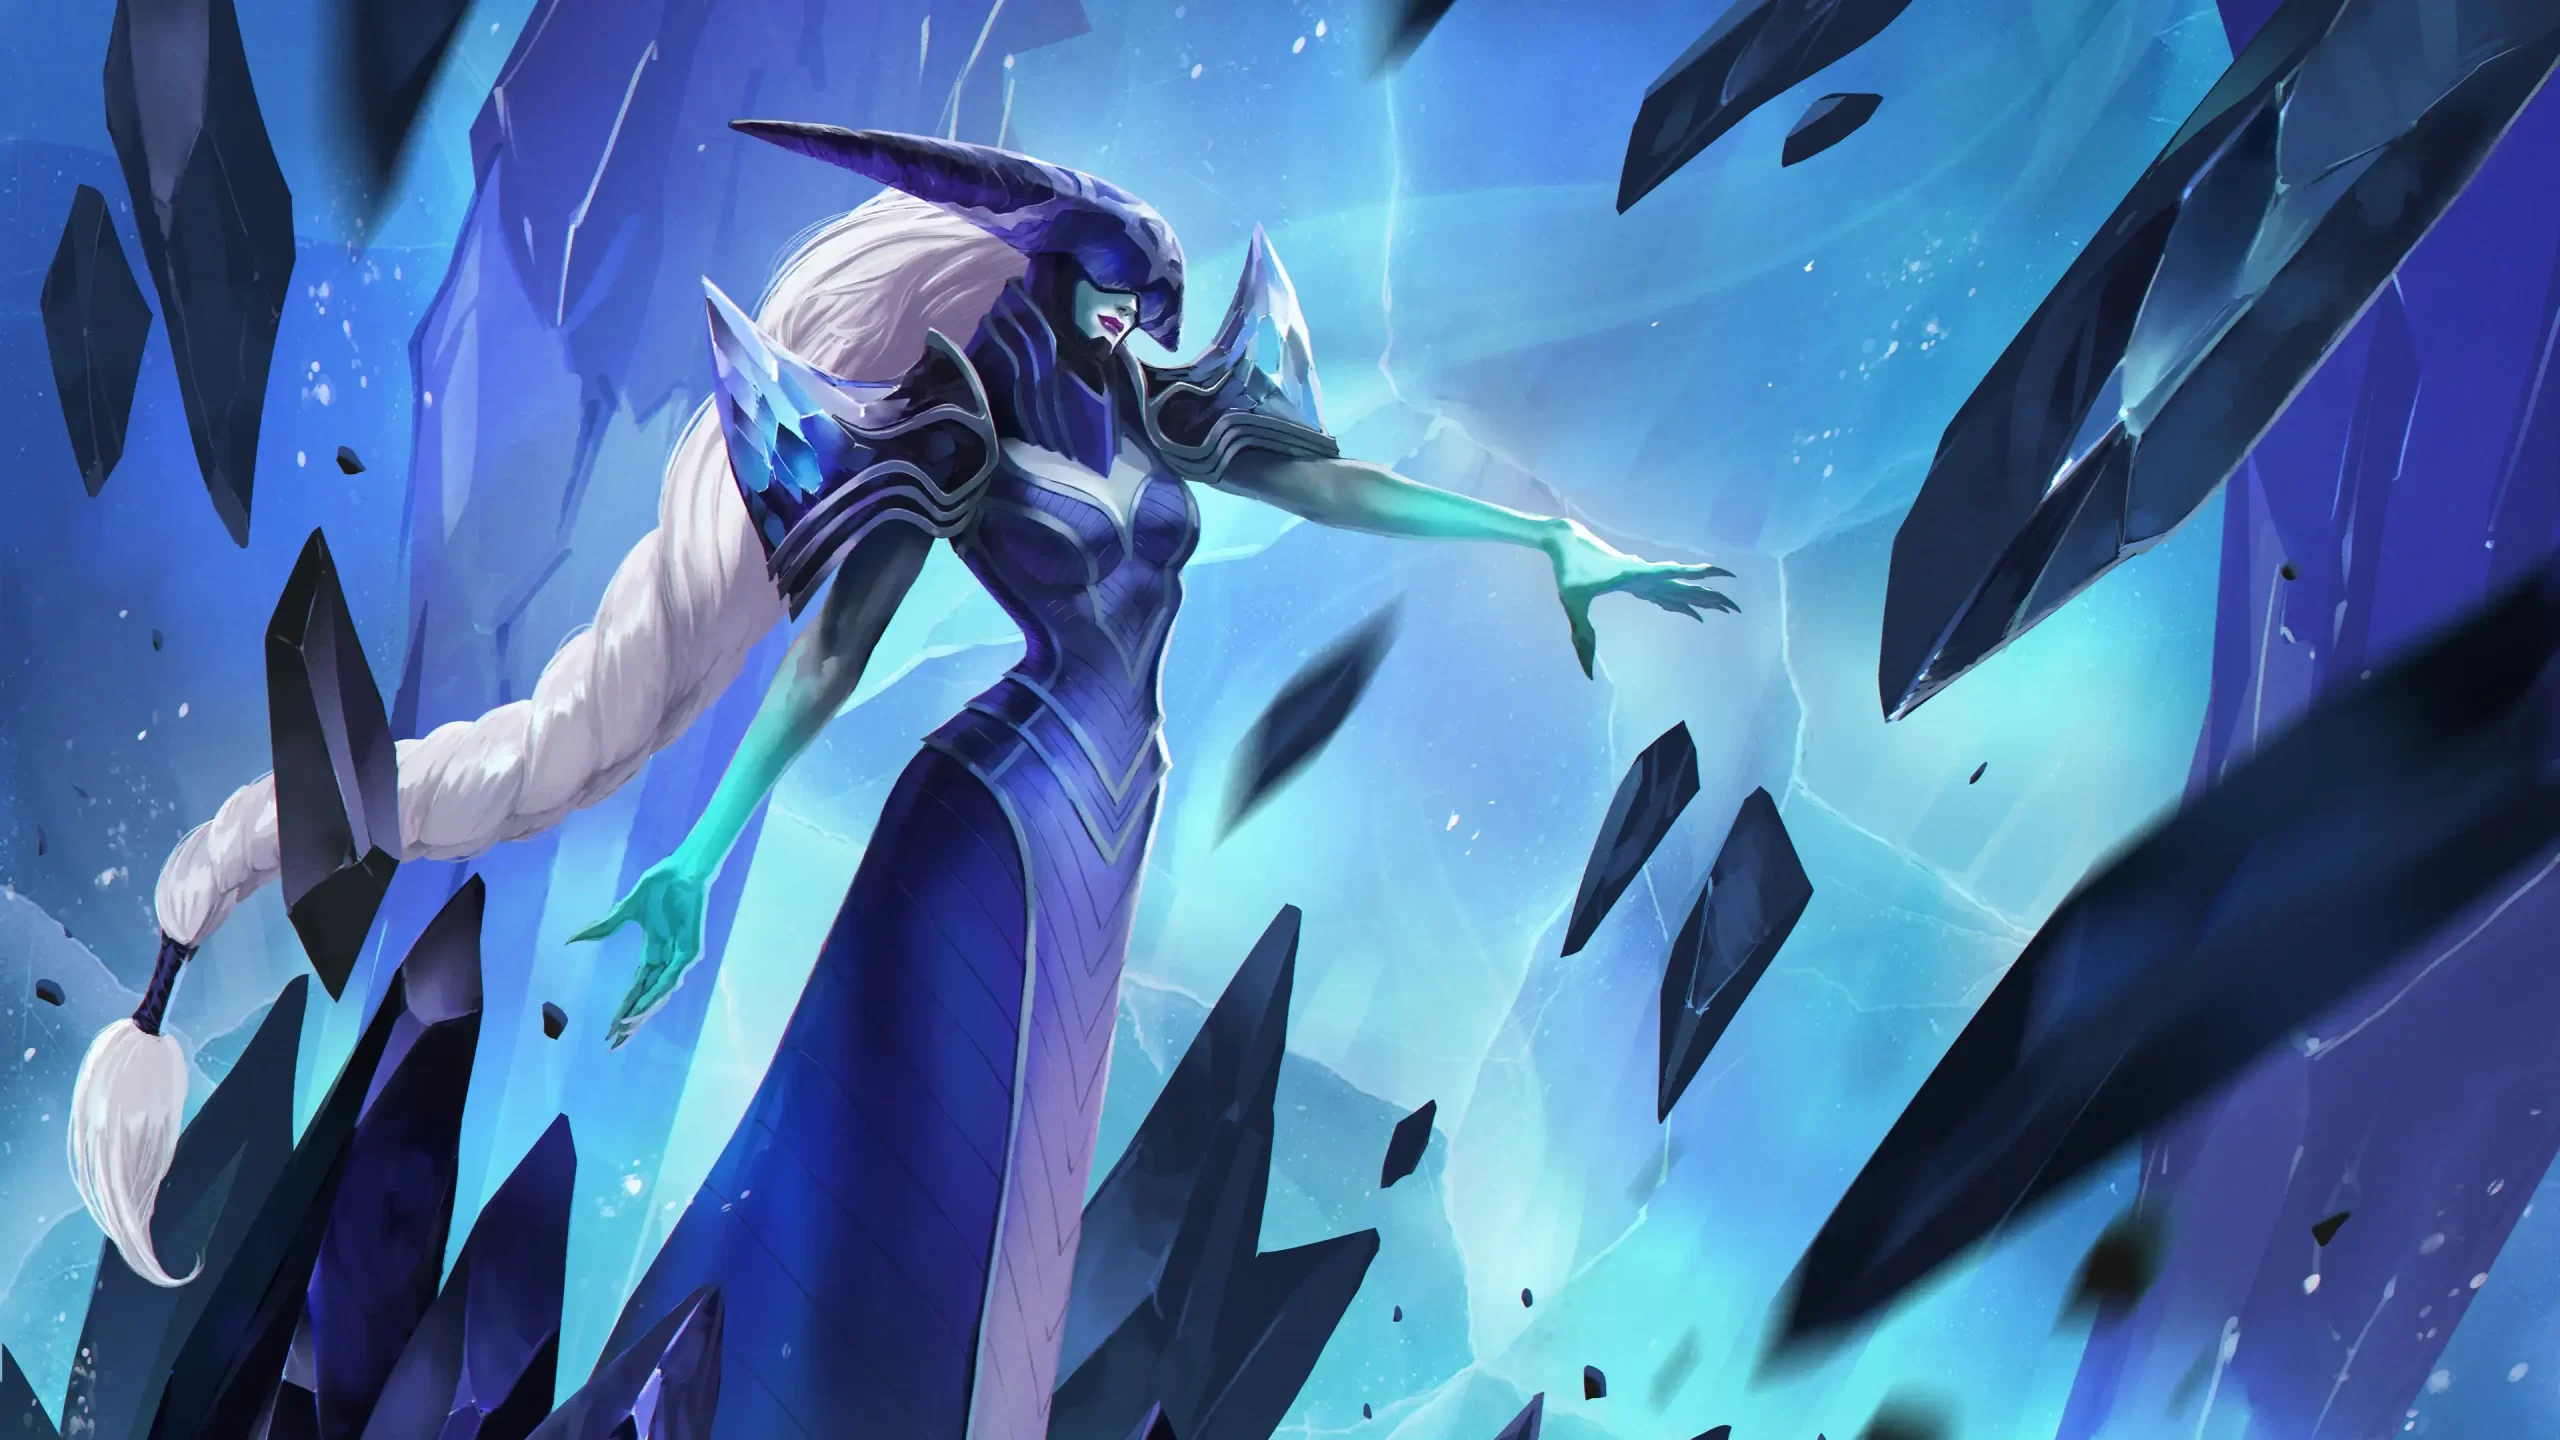 Art of redesigned Lissandra in the Freljord from Song of Nunu